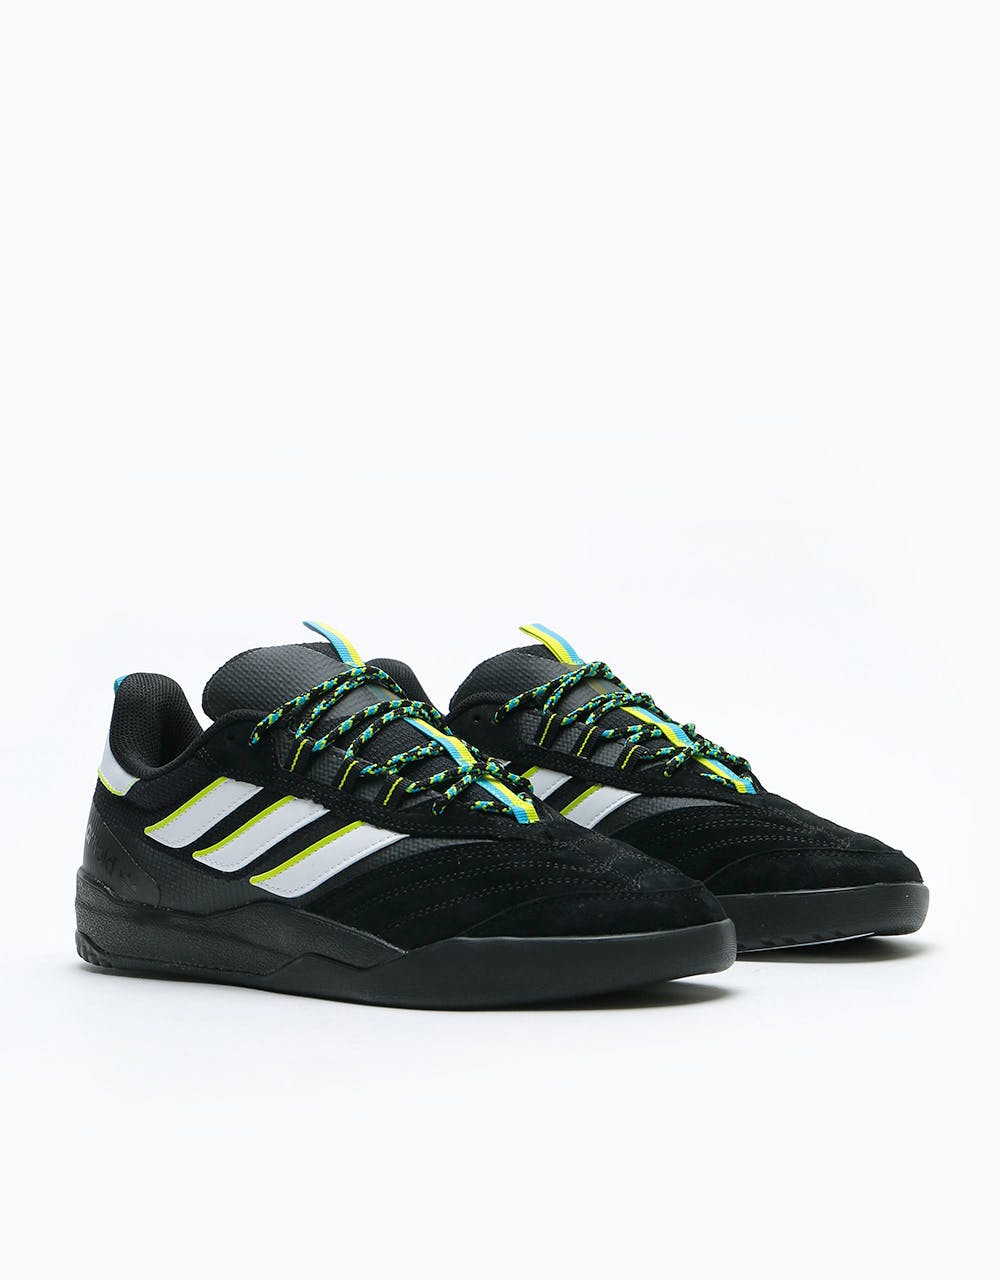 Adidas x Mike Arnold Copa Nationale Skate Shoes - Black/White/Custom